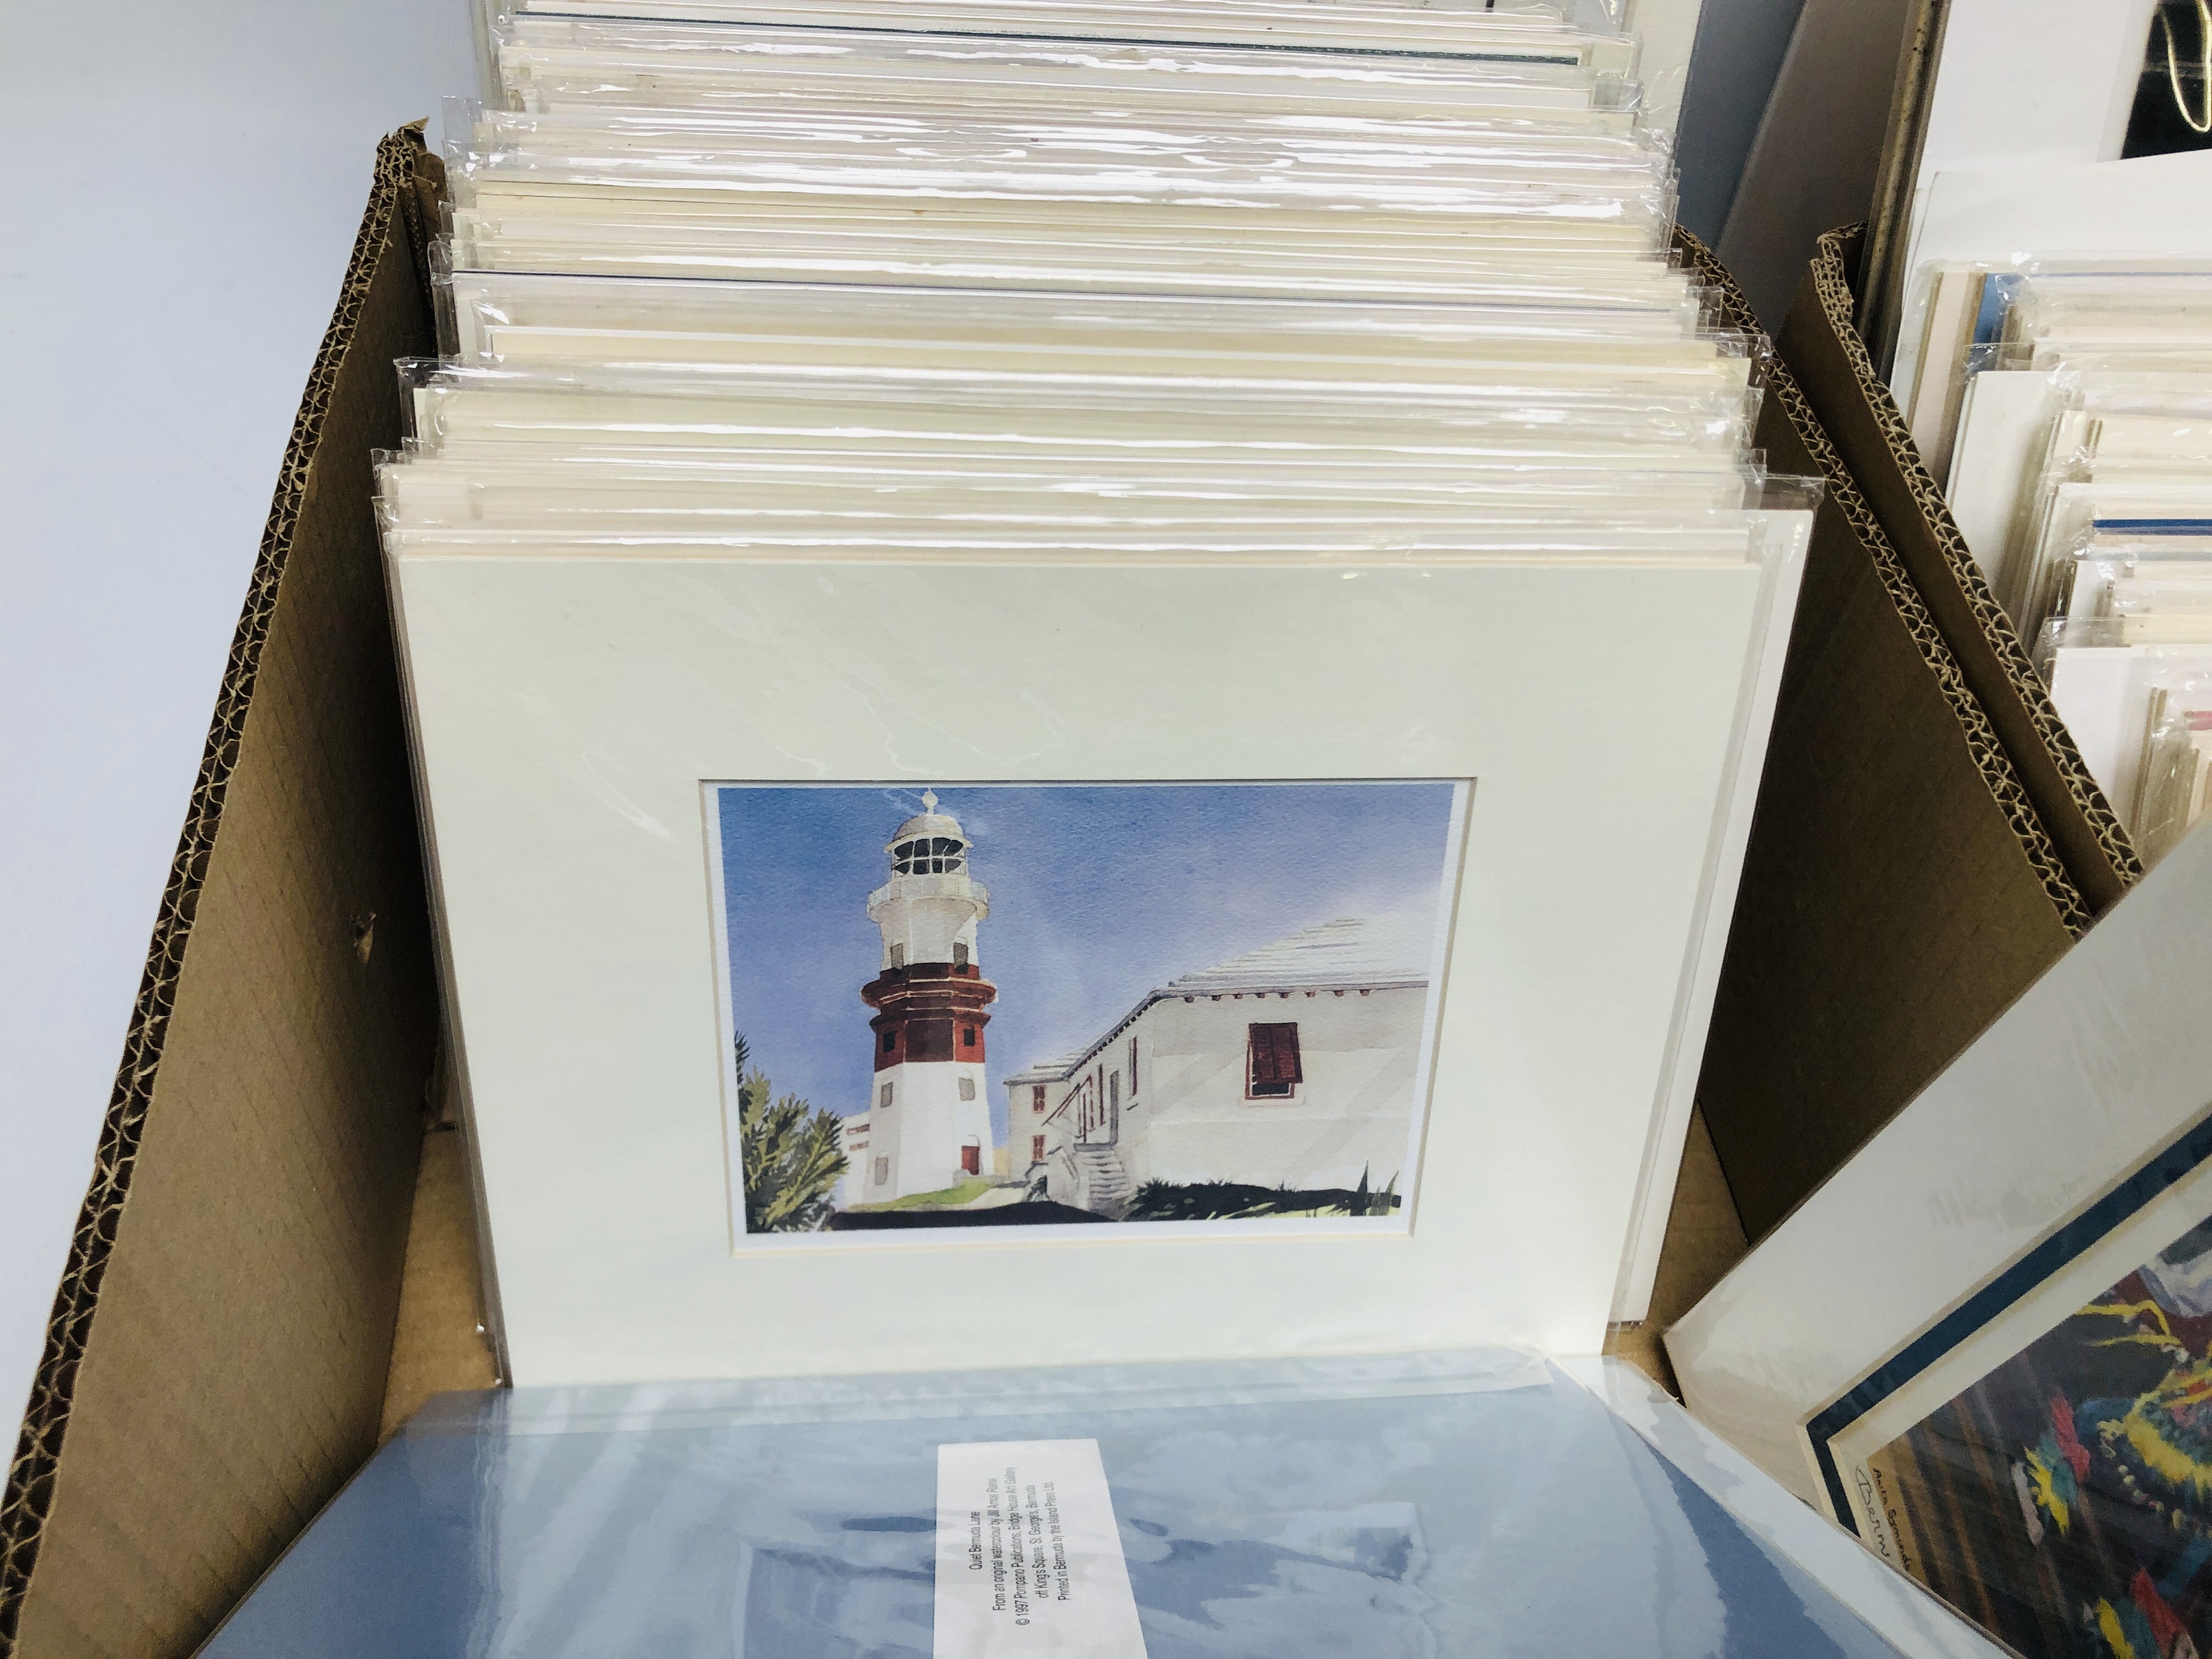 TWO BOXES OF MOUNTED PRINTS DEPICTING MAINLY SCENES OF BERMUDA BEARING PENCIL SIGNATURE DIANA - Image 5 of 11